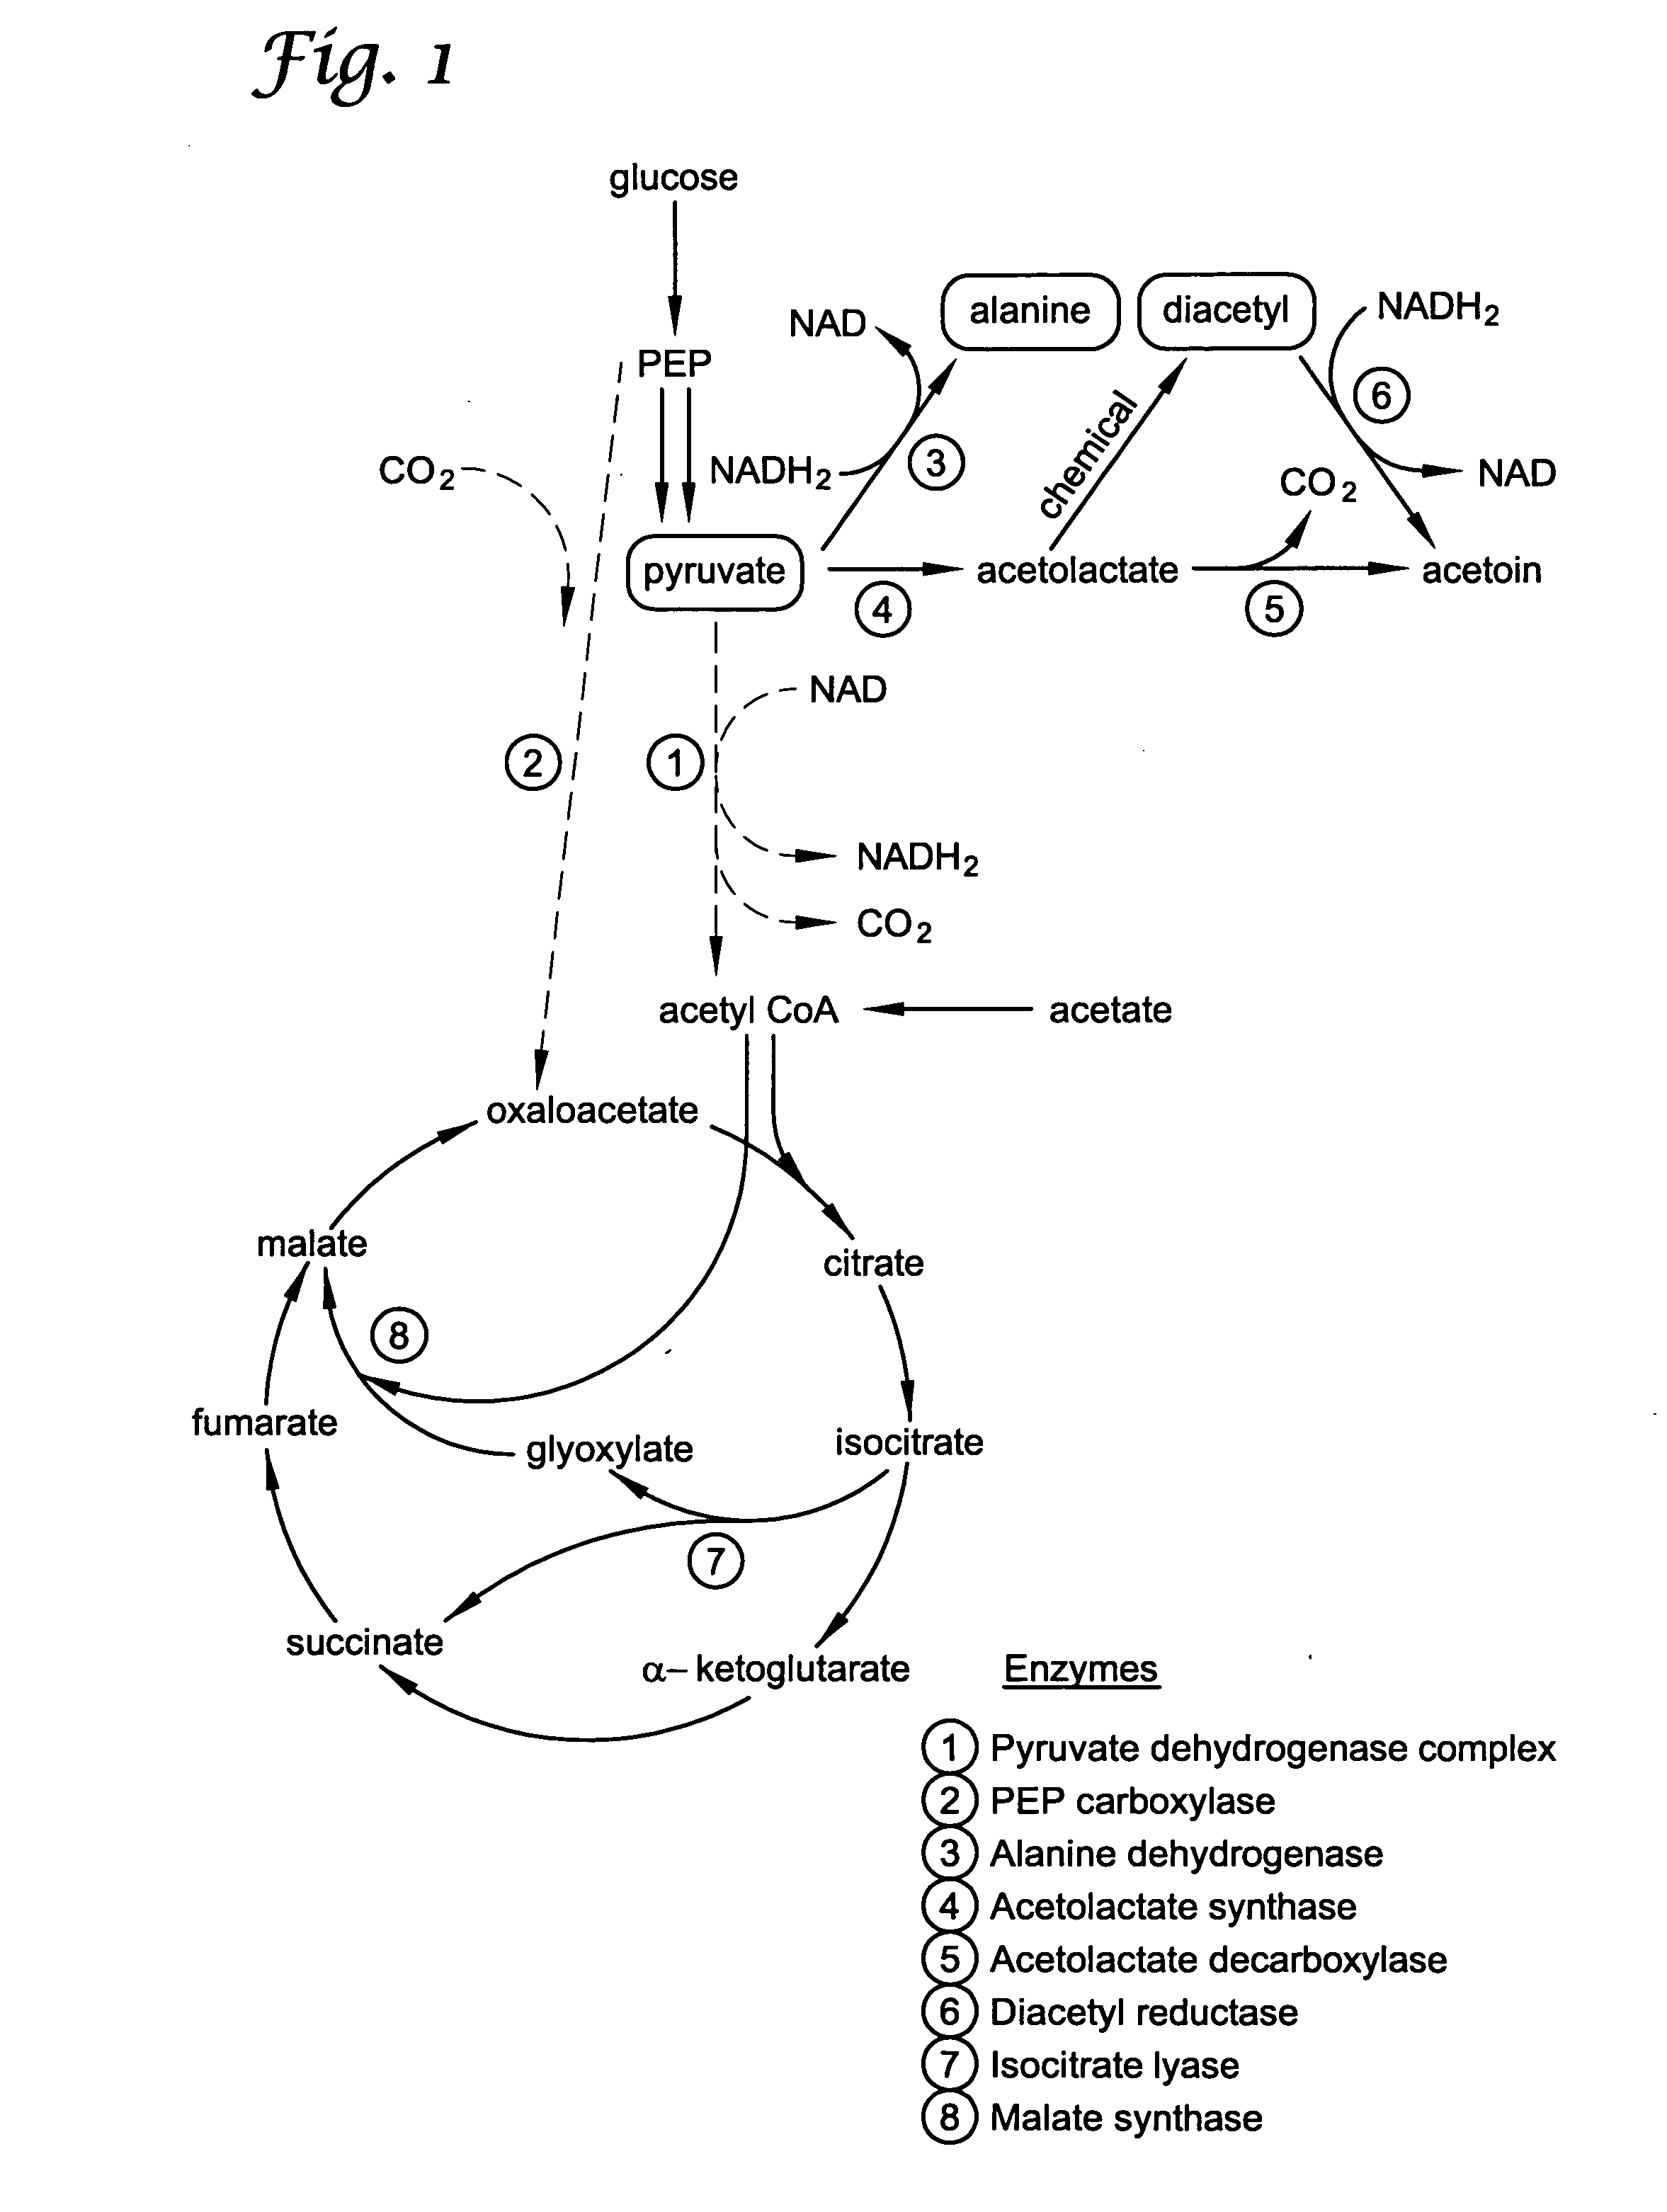 Microbial production of pyruvate and other metabolites